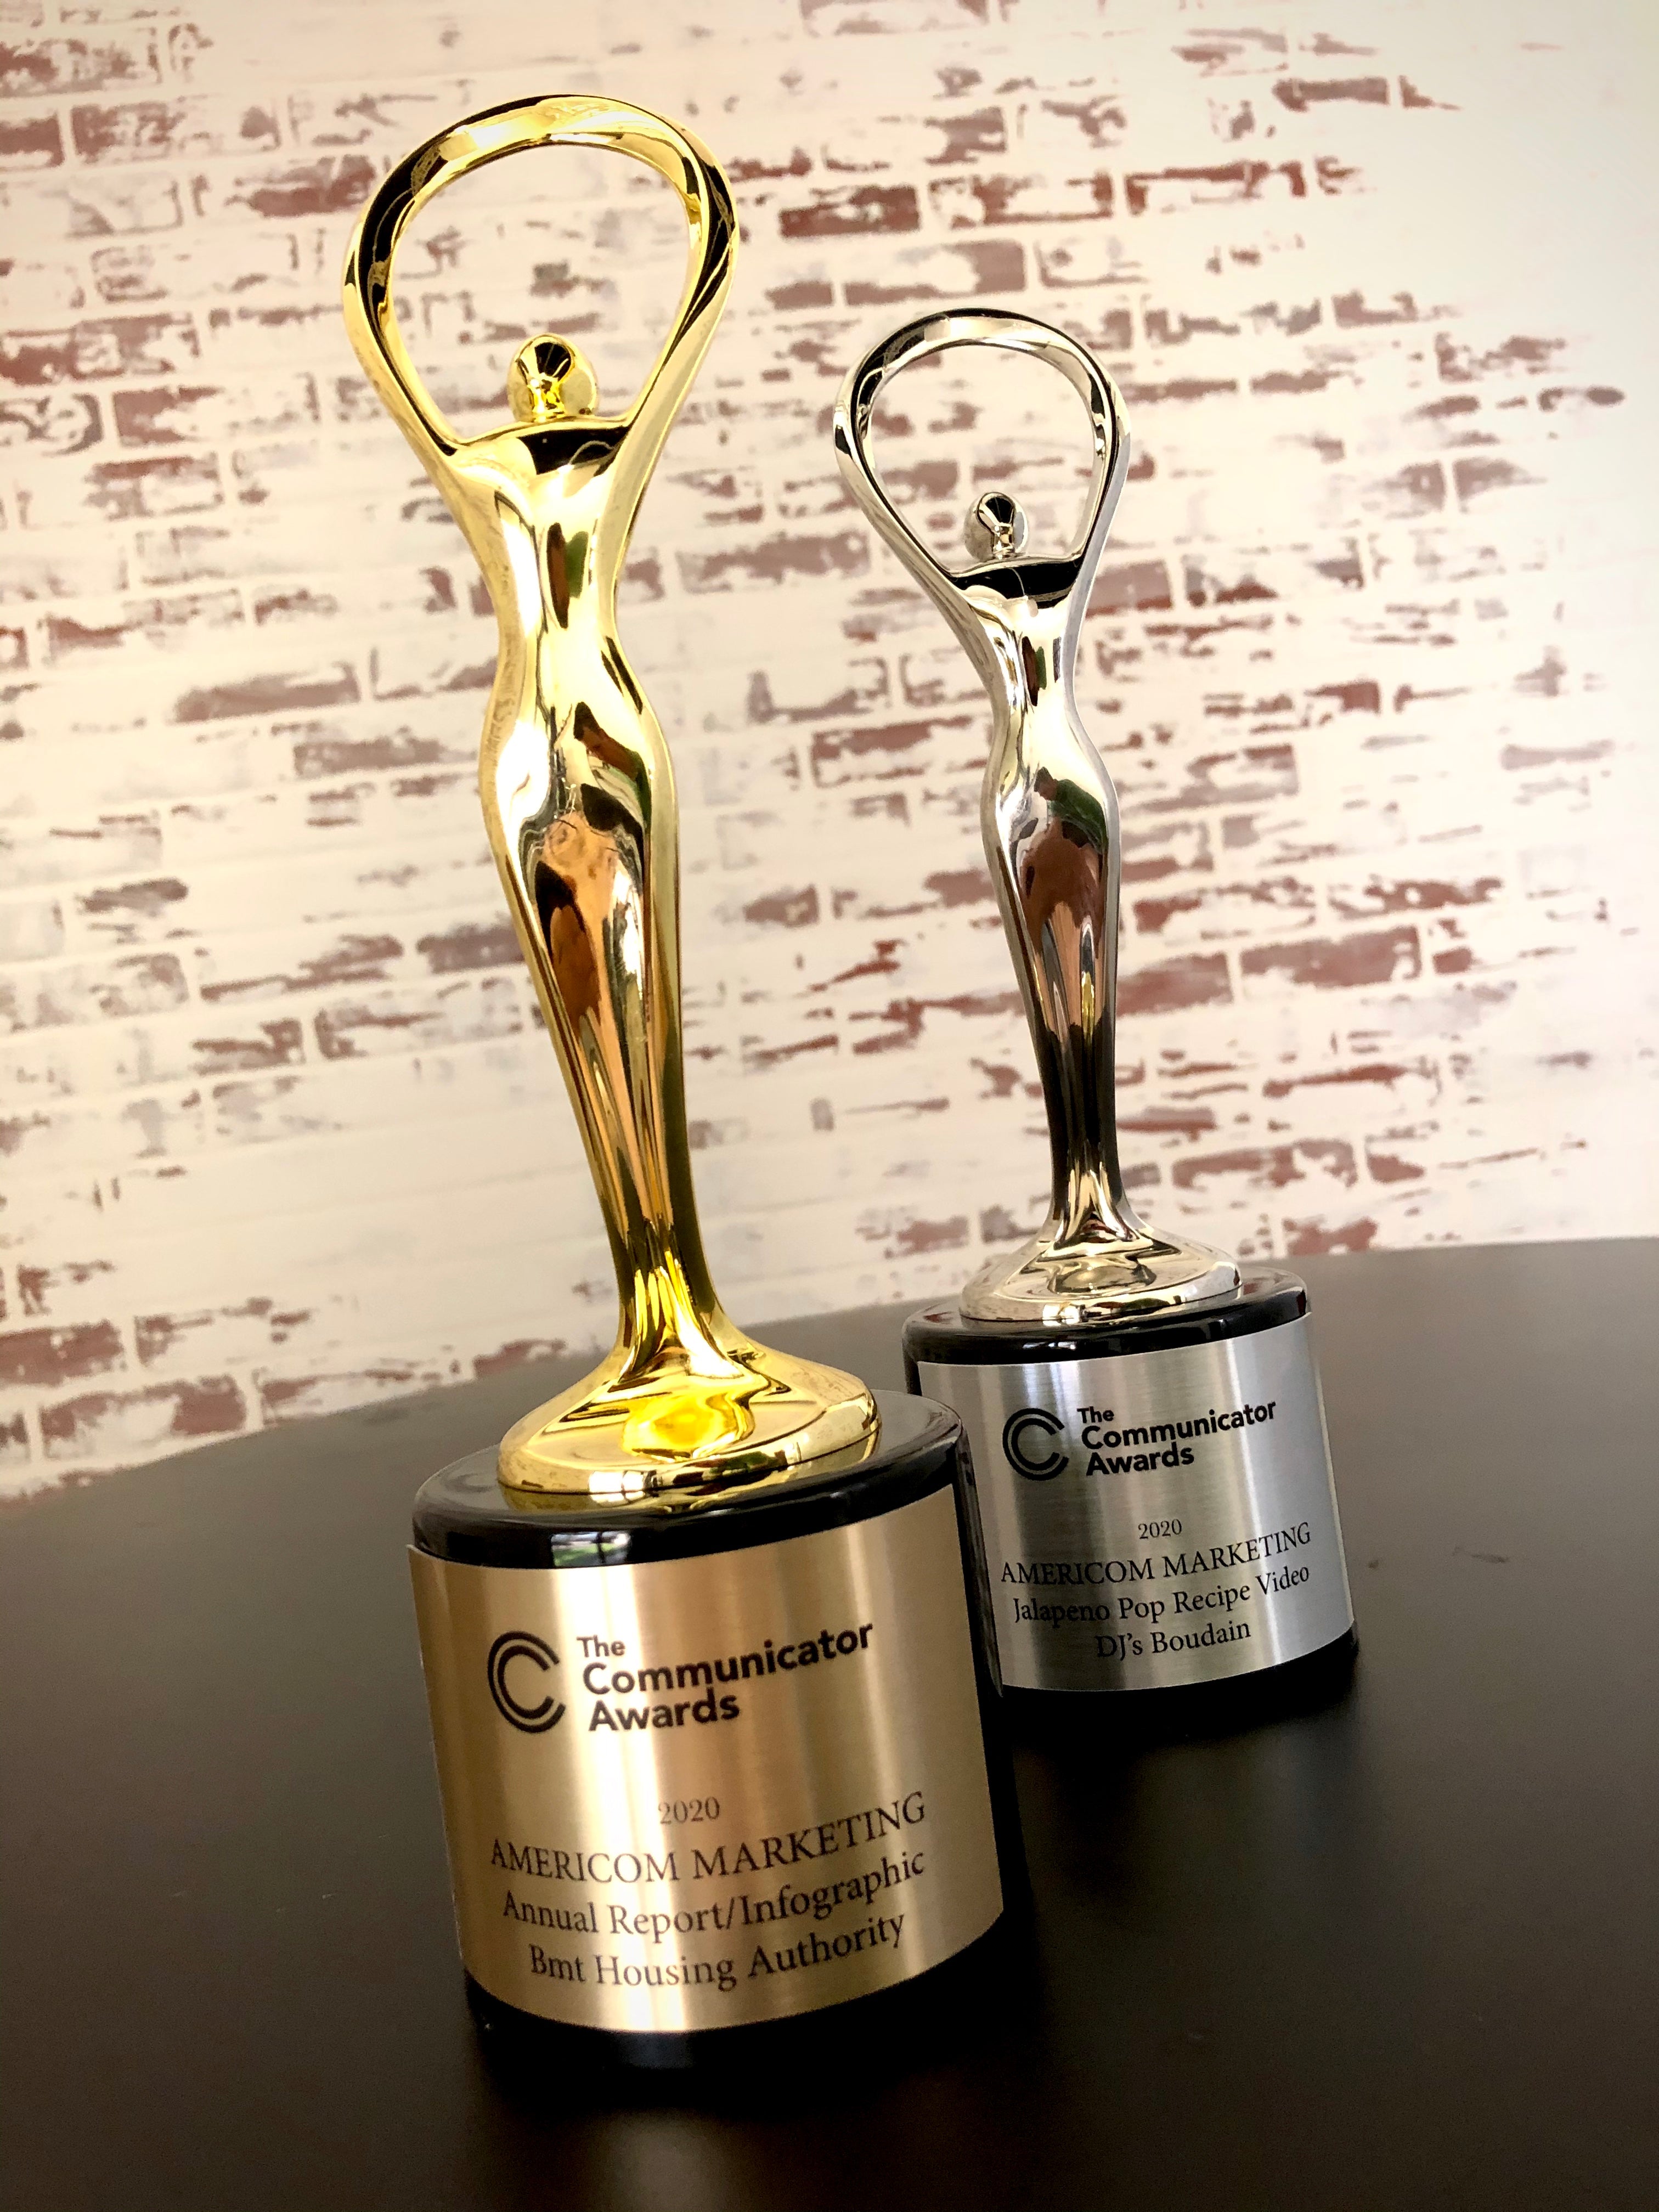 The Communicator Awards Trophies